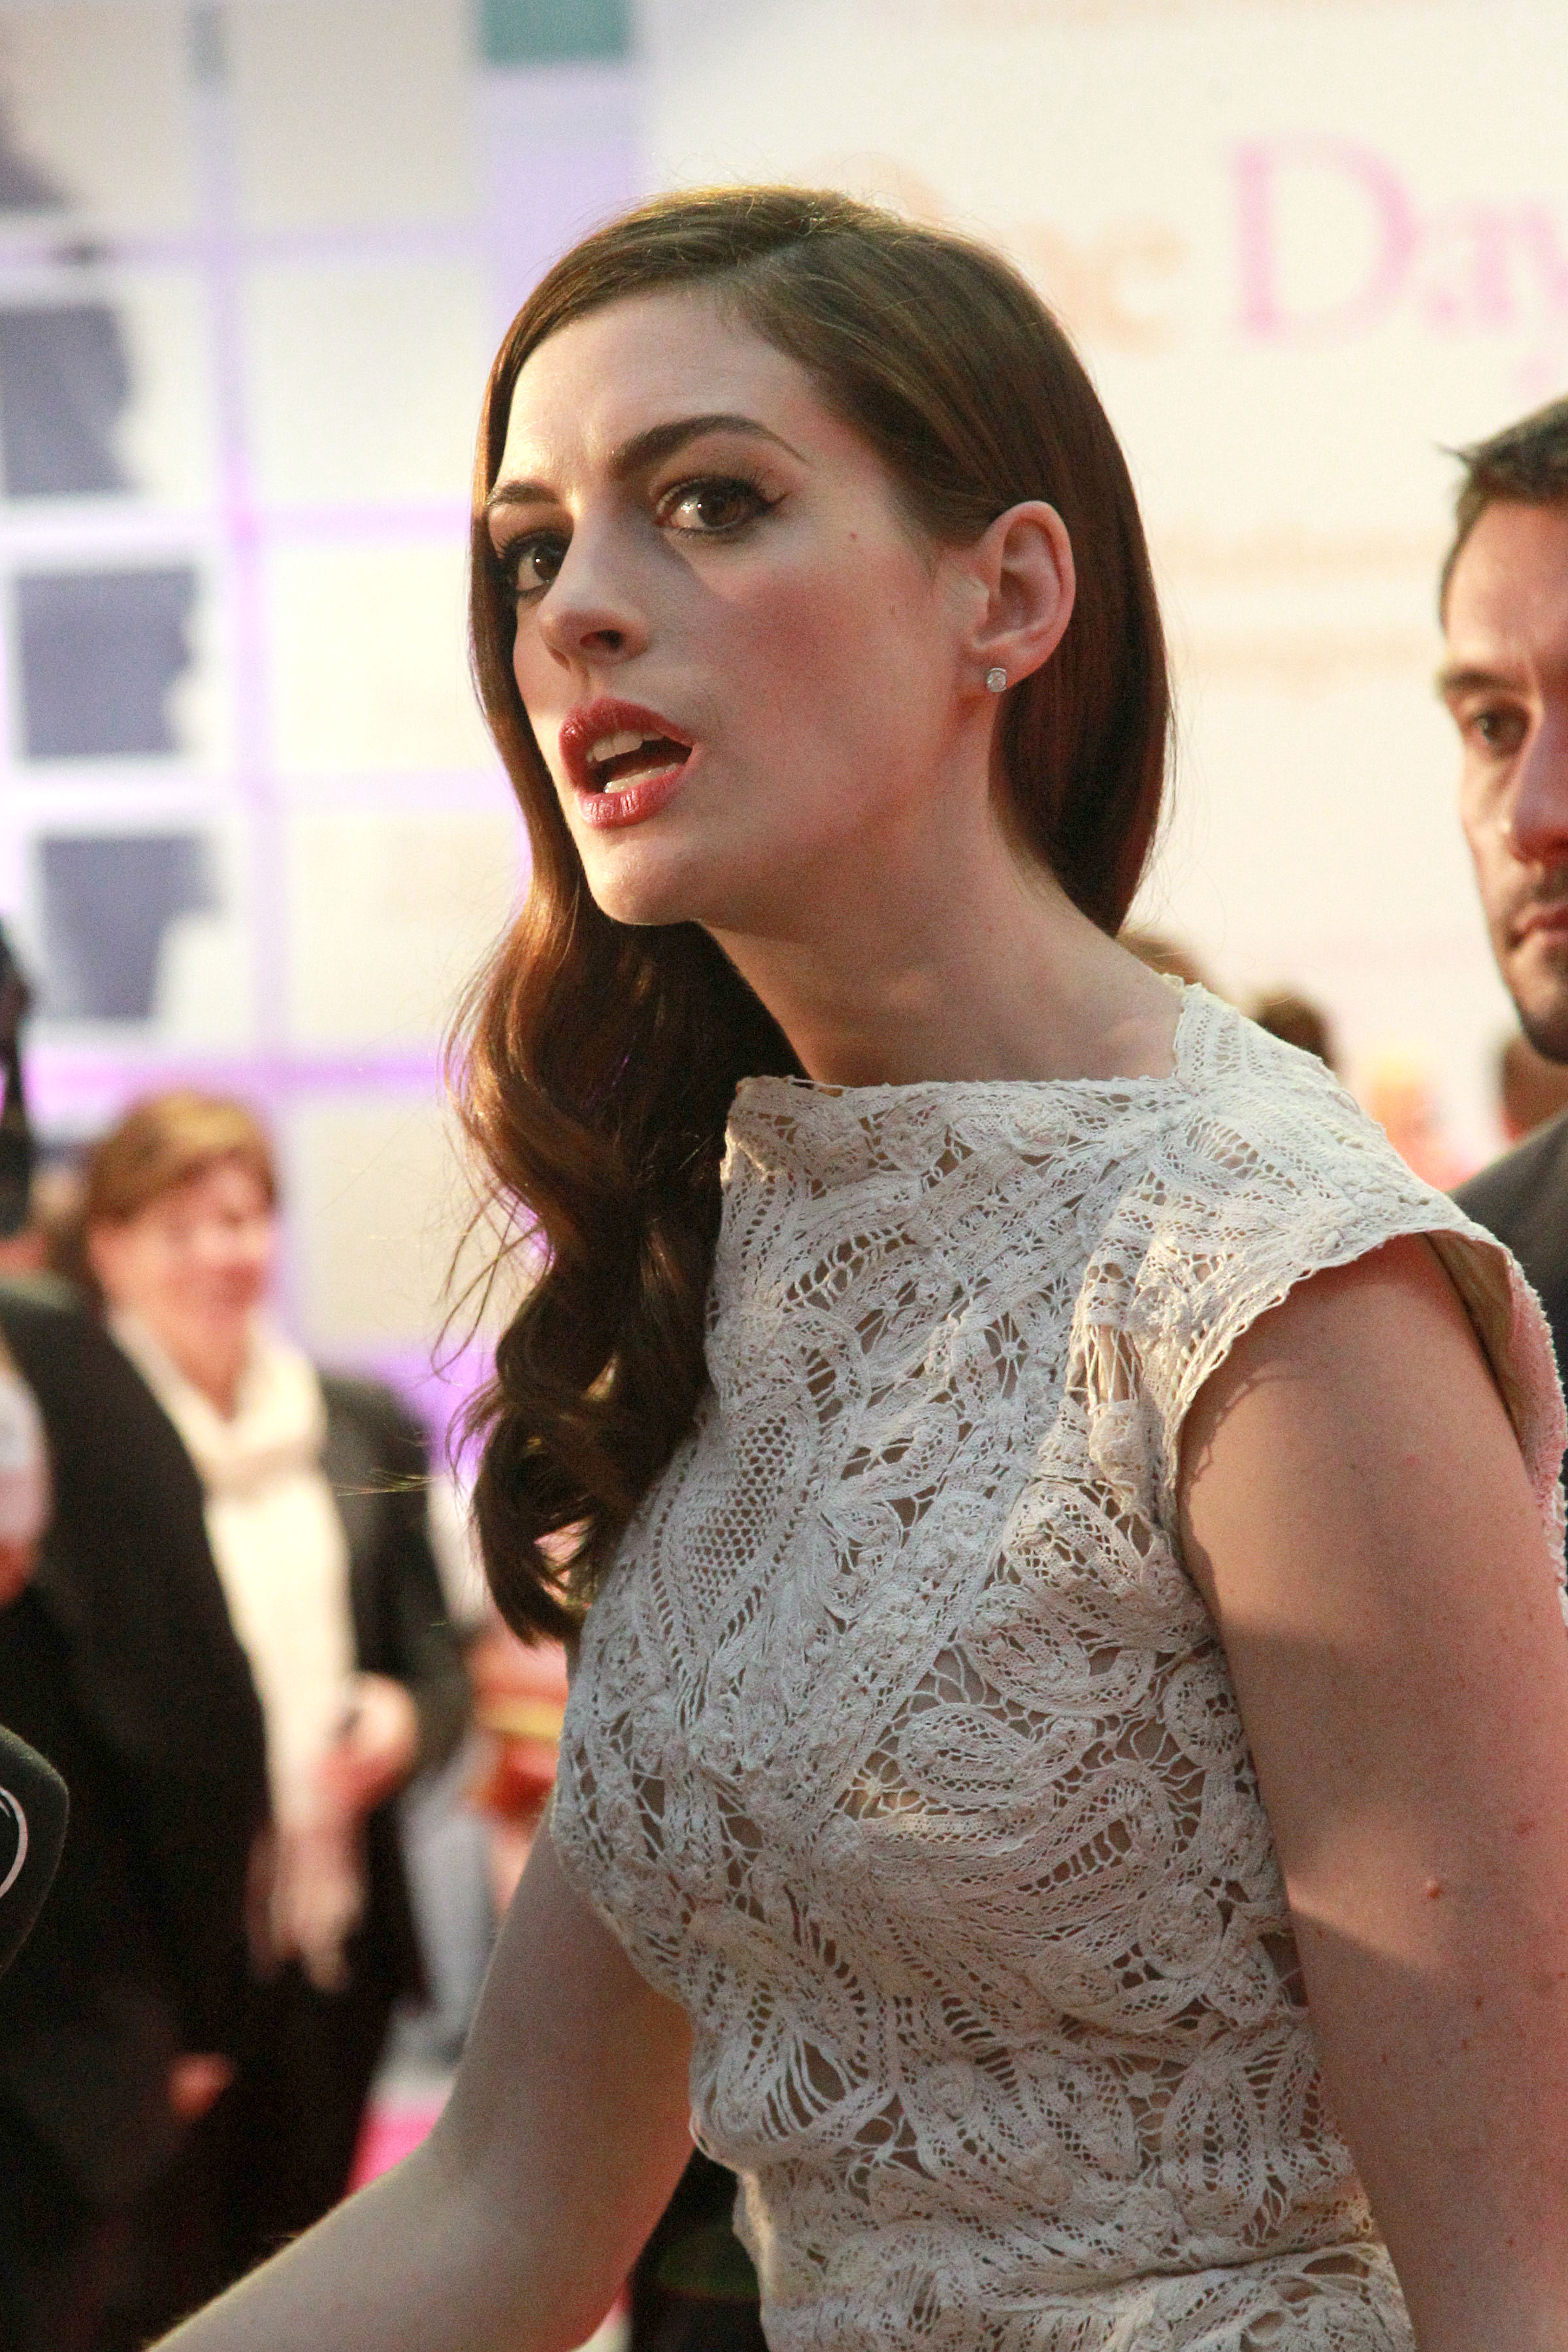 Anne Hathaway attends the One Day European Premiere at Vue Cinema, Westfield Shopping Centre on 23rd August 2011